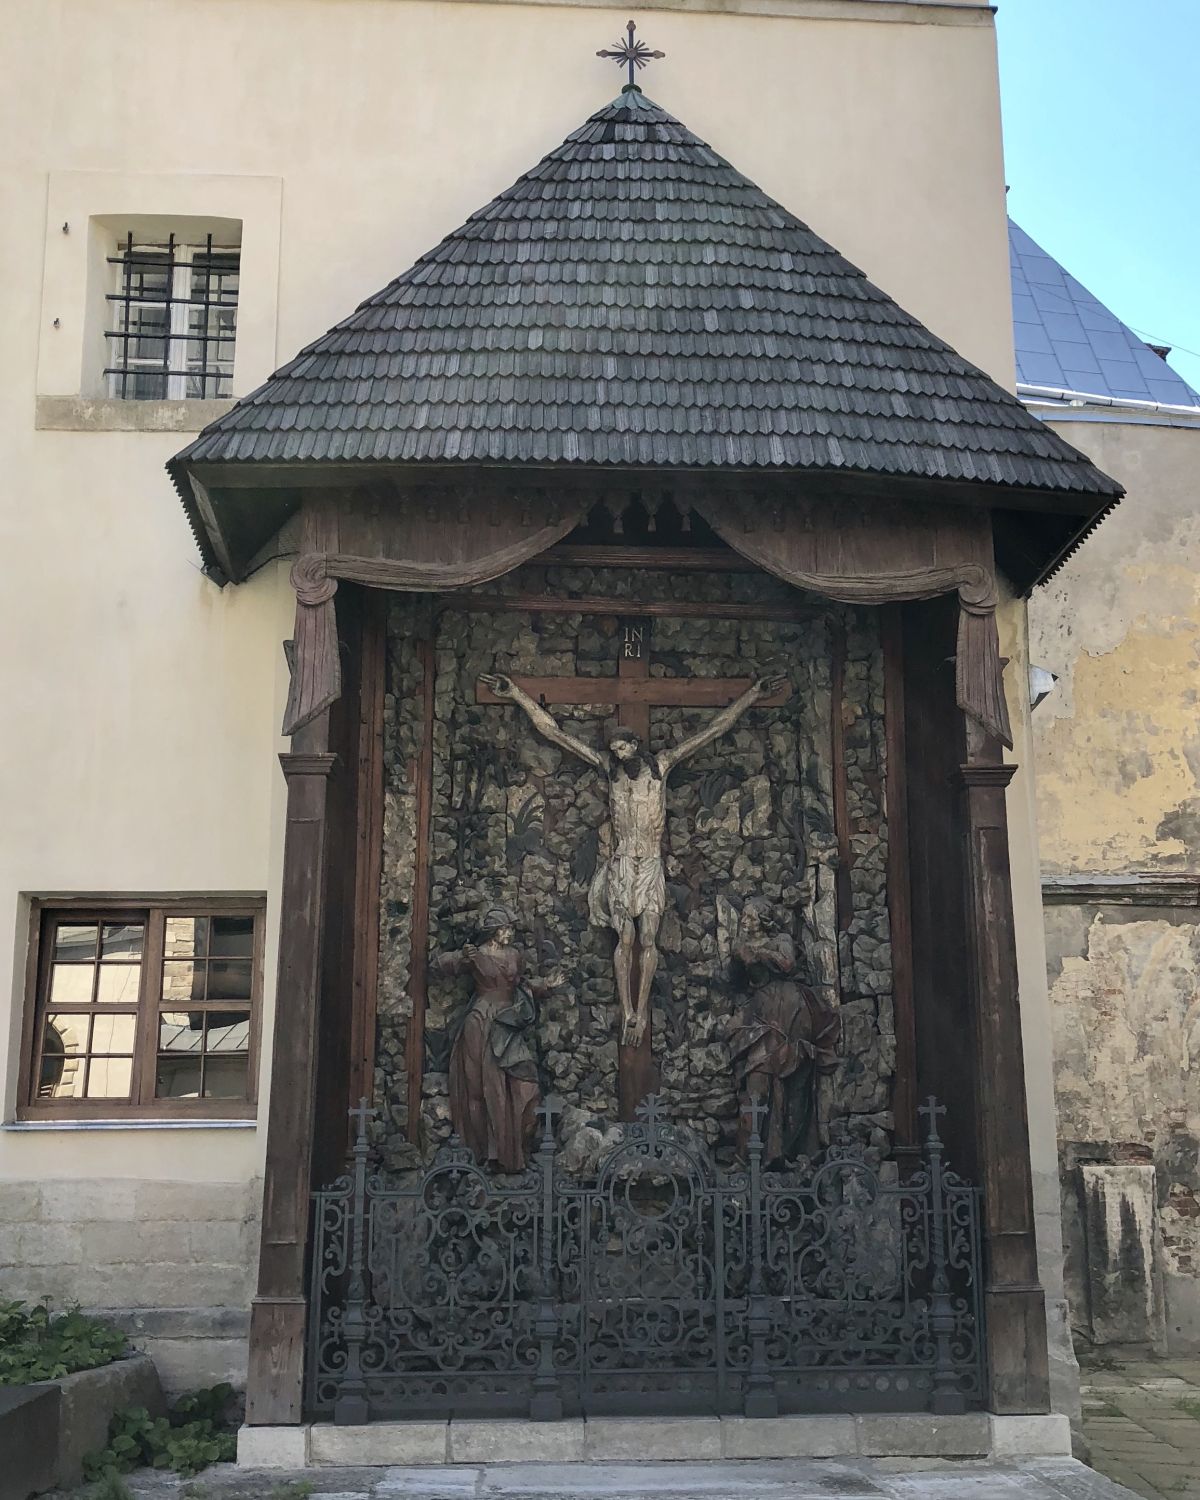 Golgotha - "Crucifixion" in the courtyard of the Armenian Cathedral in Lviv